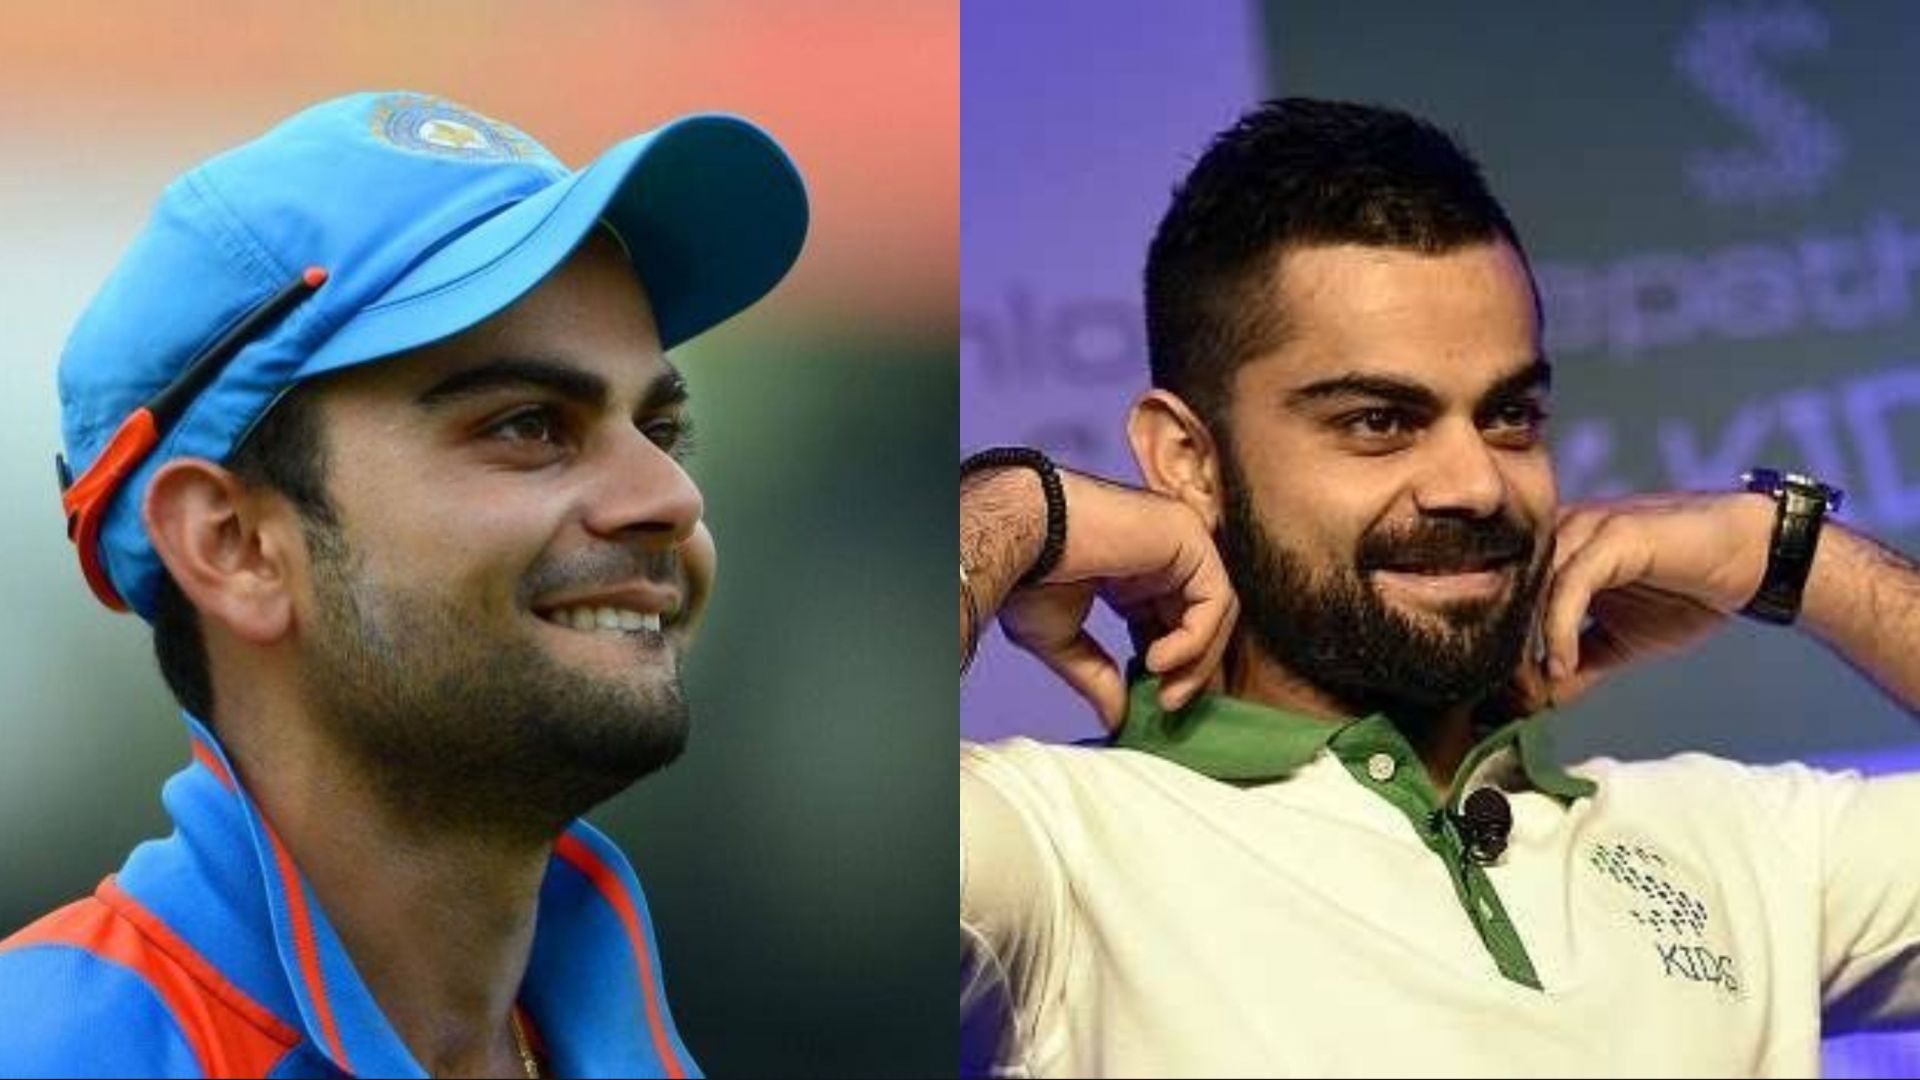 Former Indian cricket team captain Virat Kohli has said some funny things in his old interviews